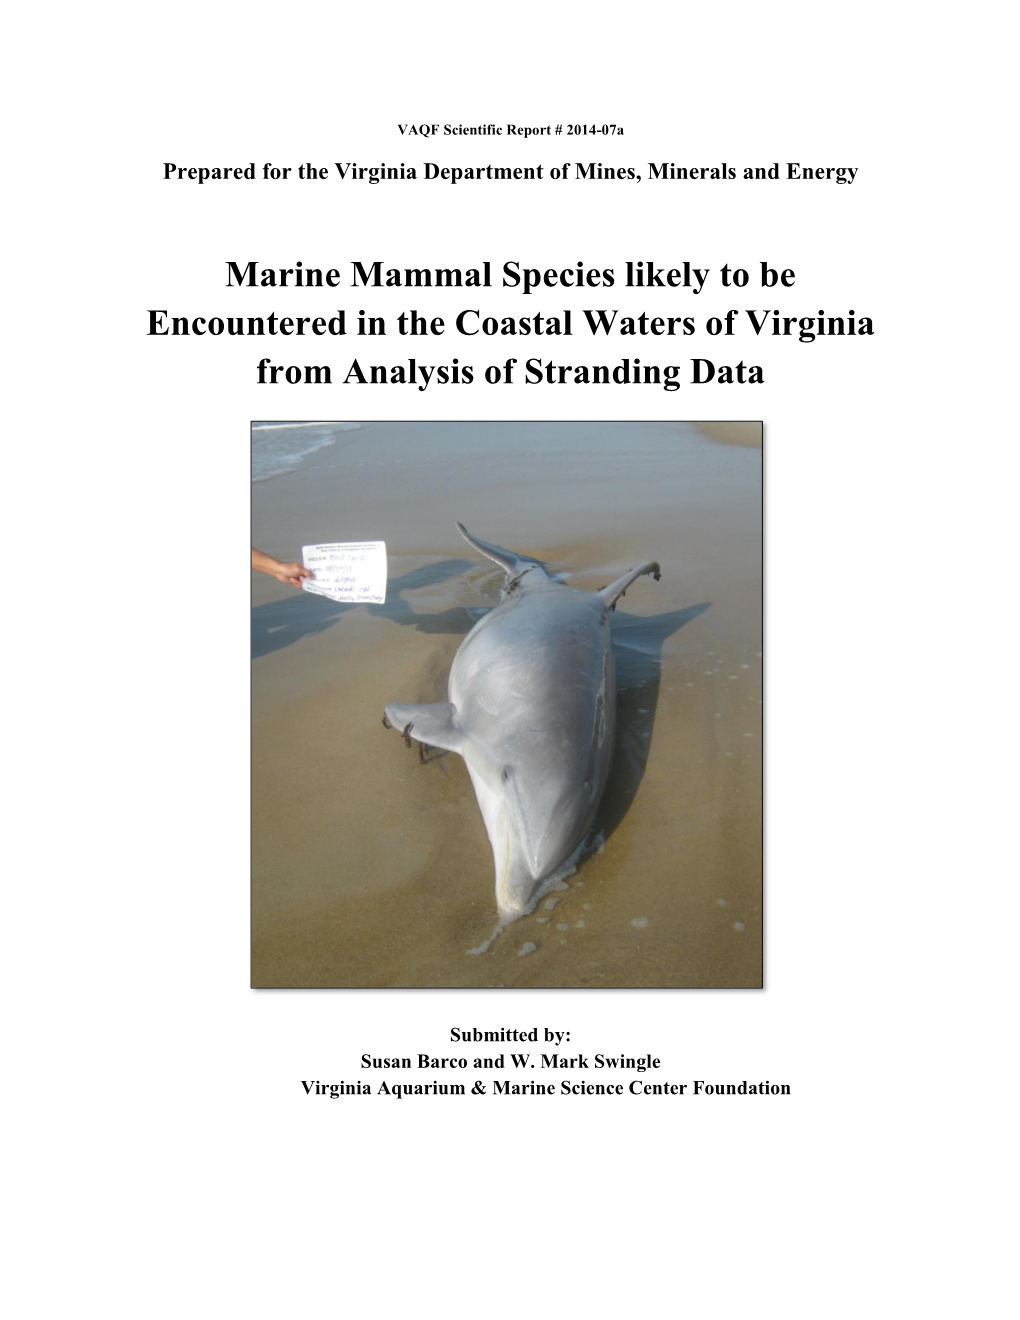 Marine Mammal Species Likely to Be Encountered in the Coastal Waters of Virginia from Analysis of Stranding Data